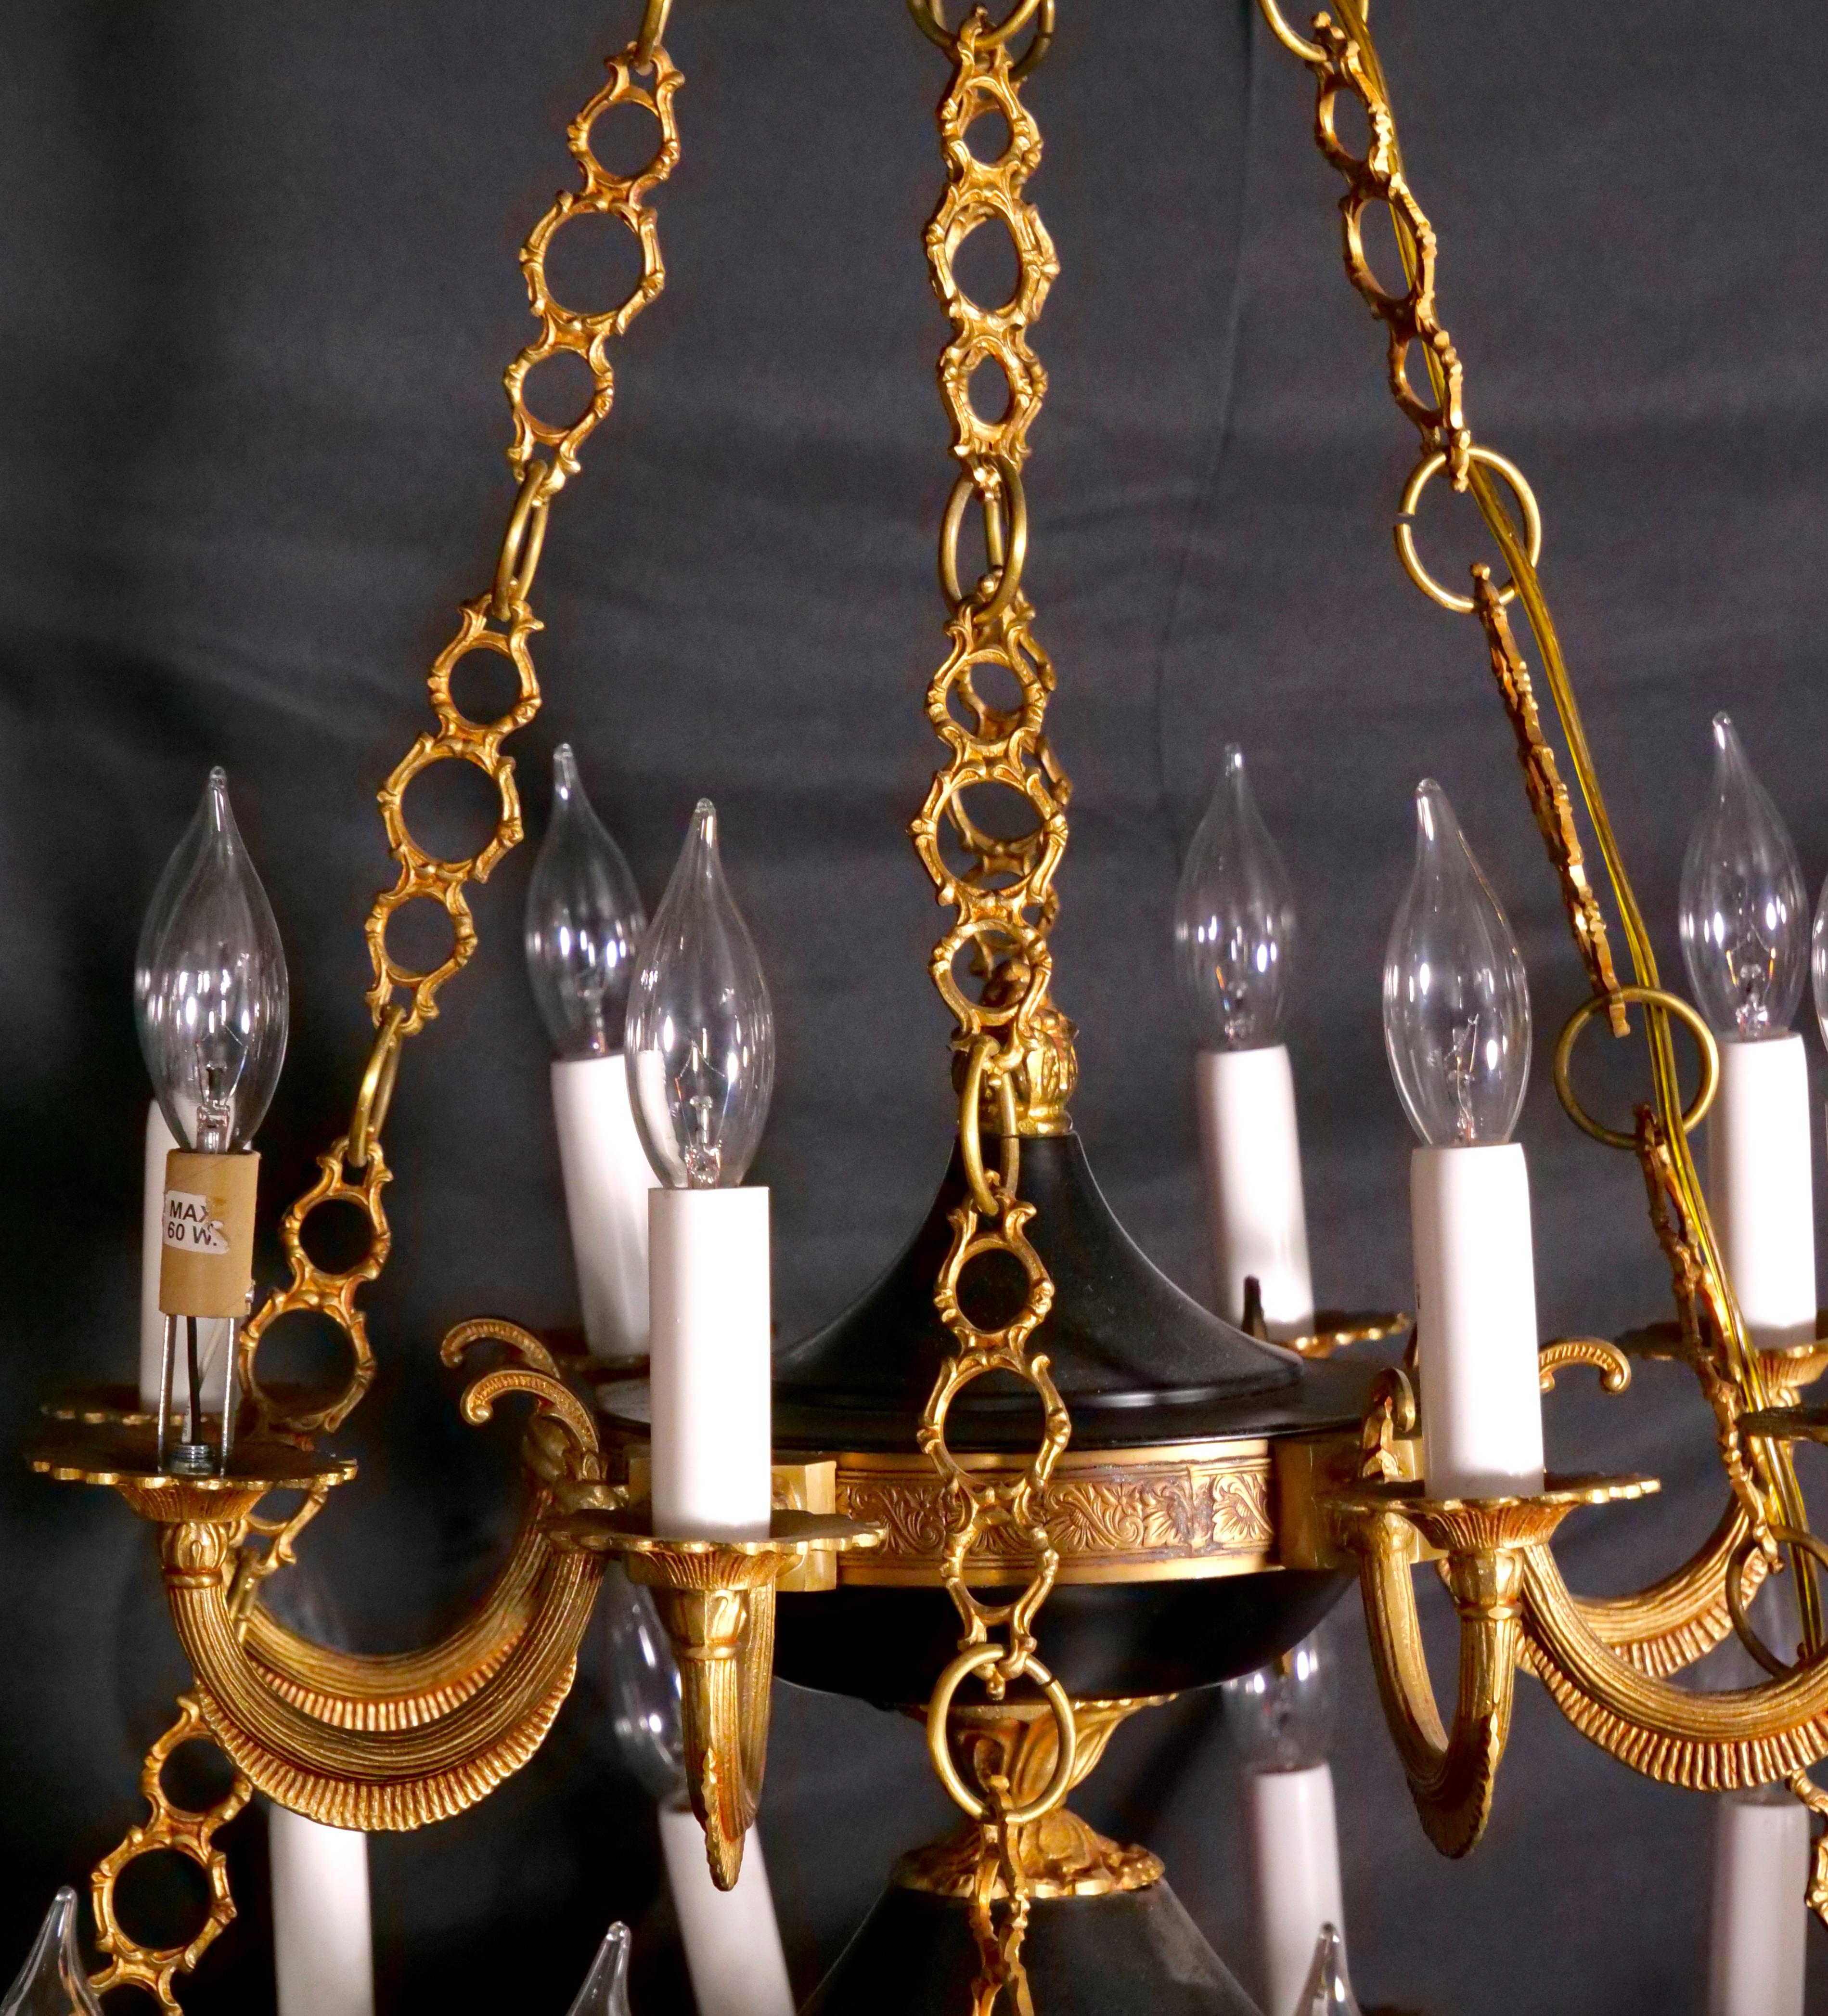 19th Century French Empire Style 24-Light Gilt Bronze / Patinated Chandelier For Sale 5